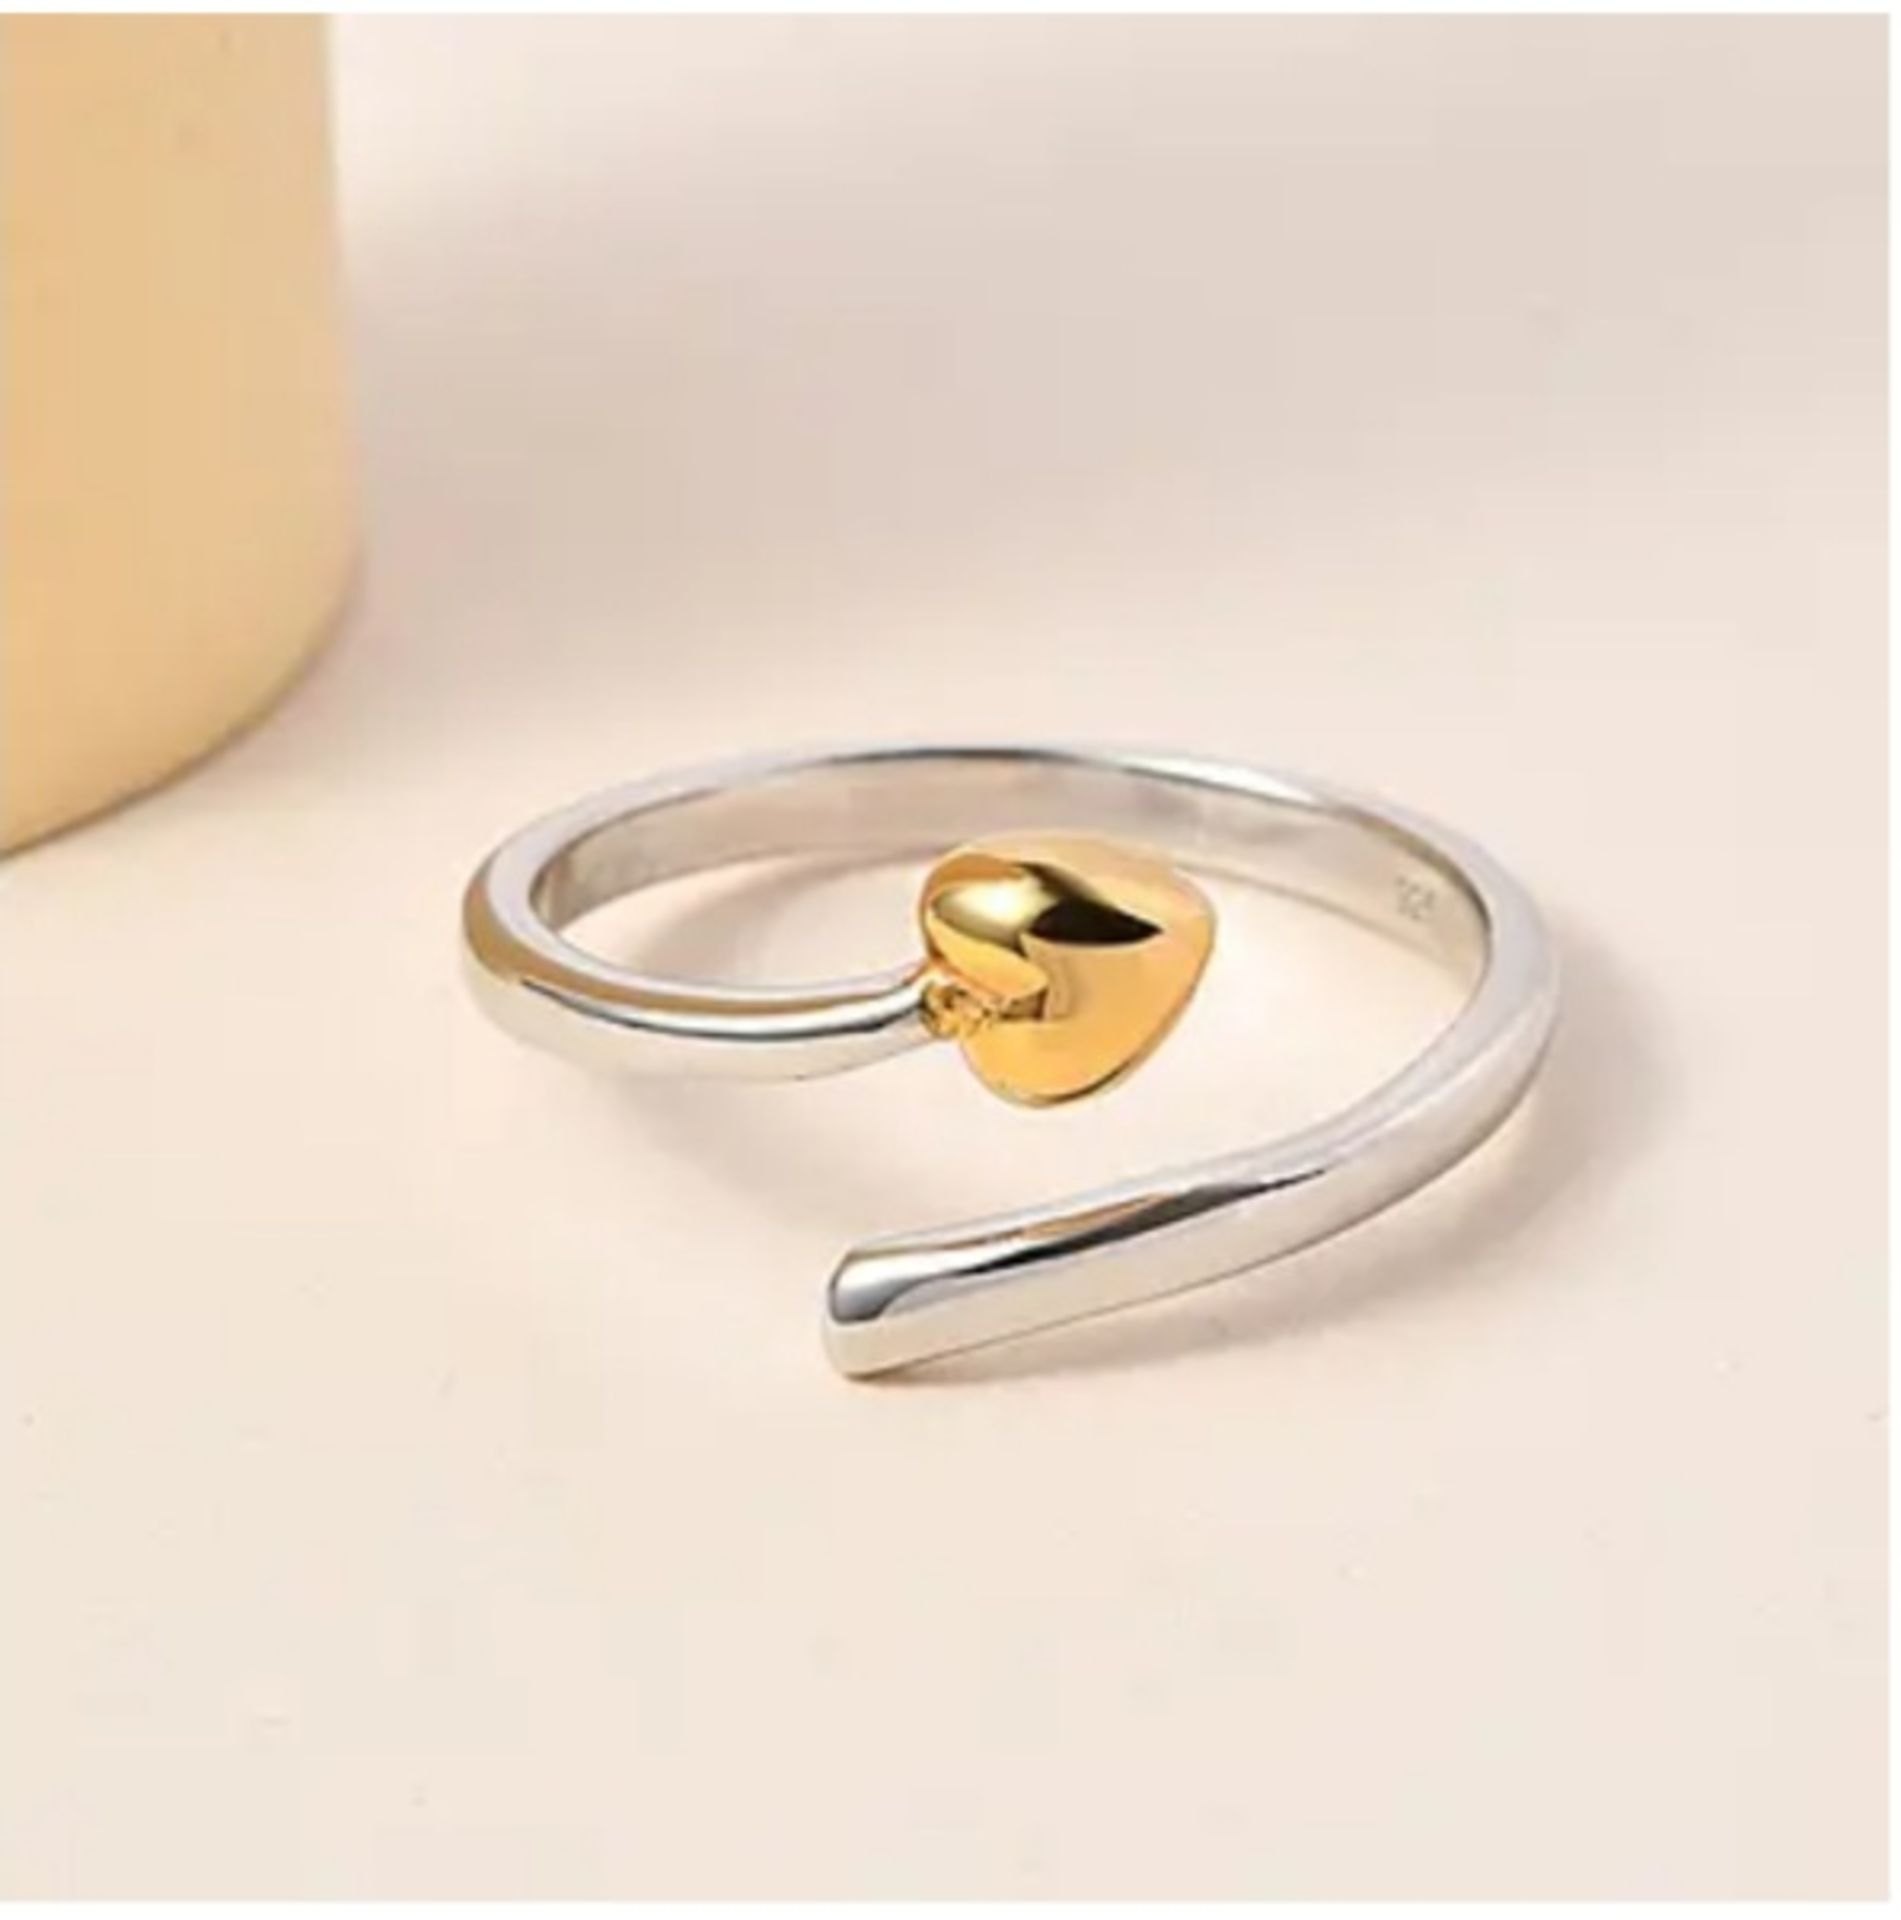 NEW! Platinum and 18K Yellow Gold Vermeil Plated Sterling Silver Adjustable Heart Ring